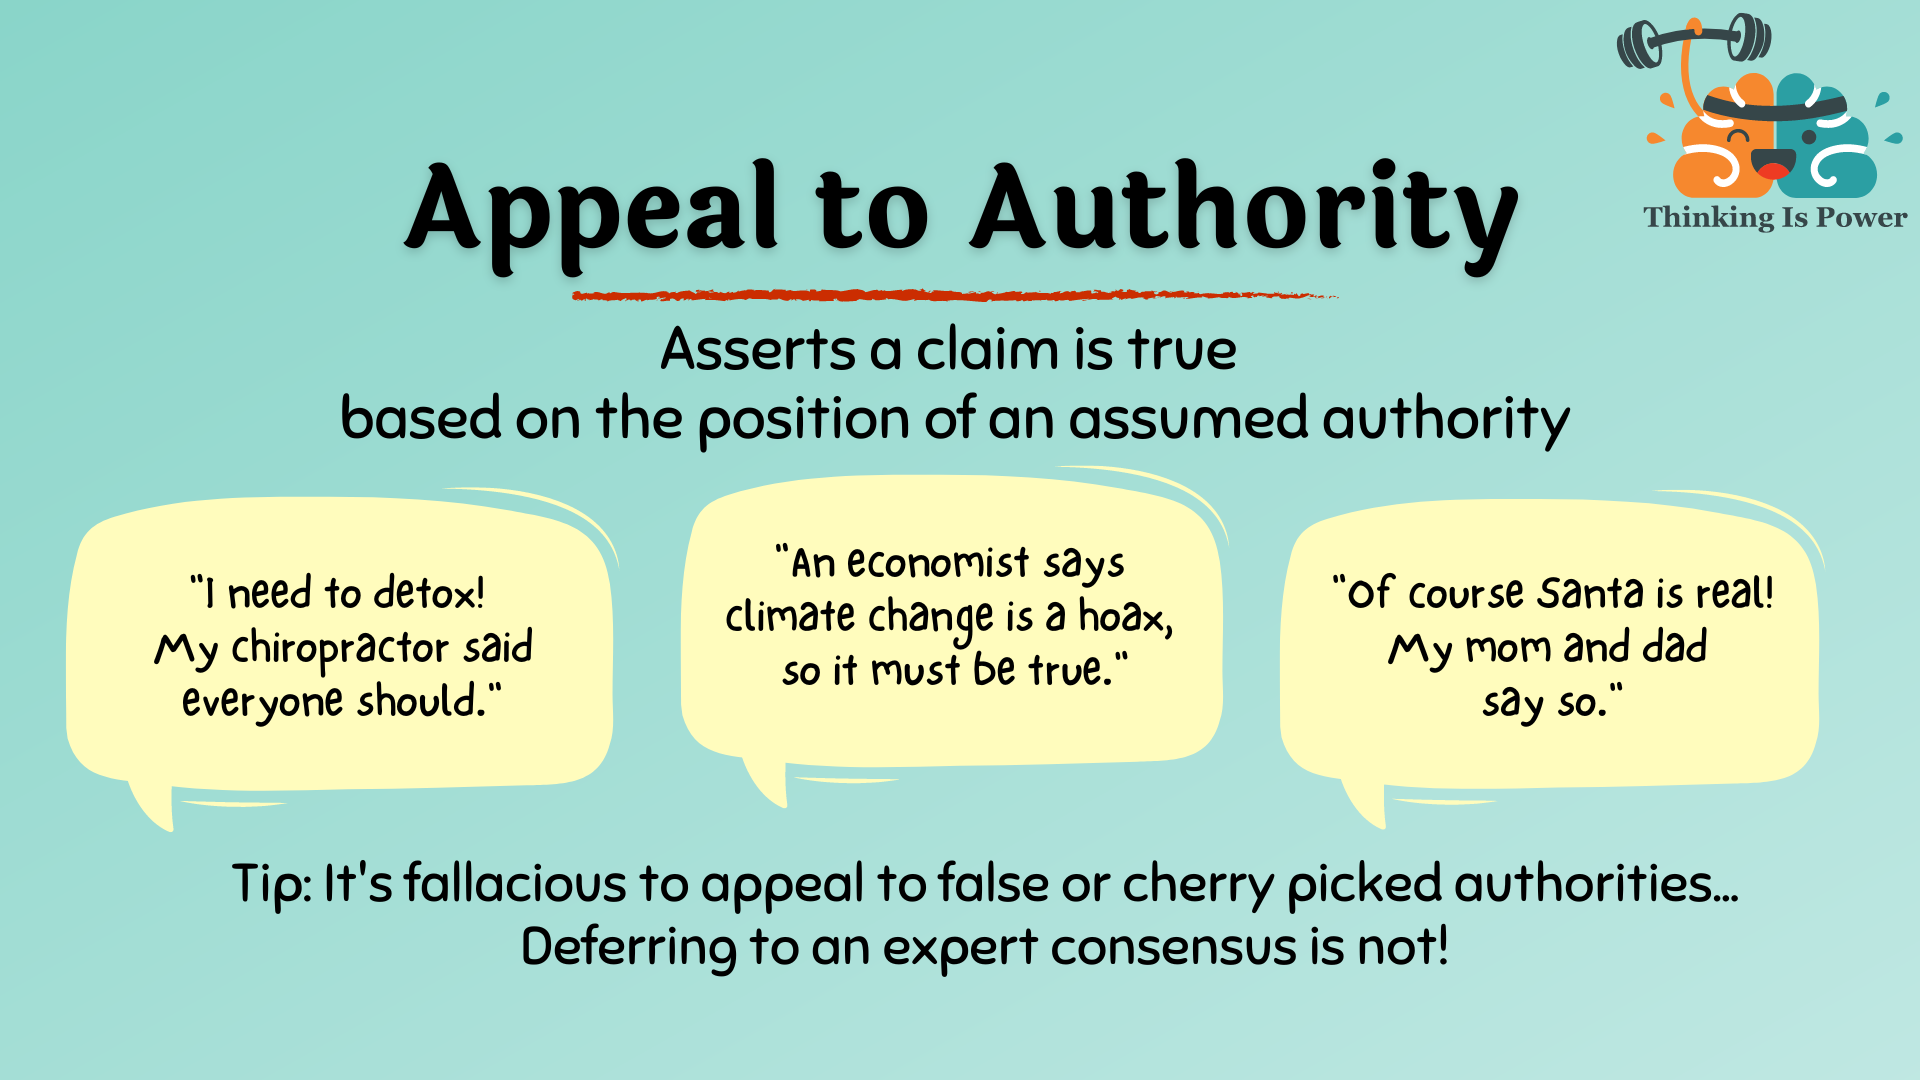 Appeal to authority fallacy asserts a claim is true based on the position of an assumed authority. Examples are friend who is a nurse says vaccines cause autism; a senator says climate change is a hoax; and an actress says eating cheese causes acne. These are all false authorities and not actual experts. Note: Deferring to the expert consensus is not fallacious!